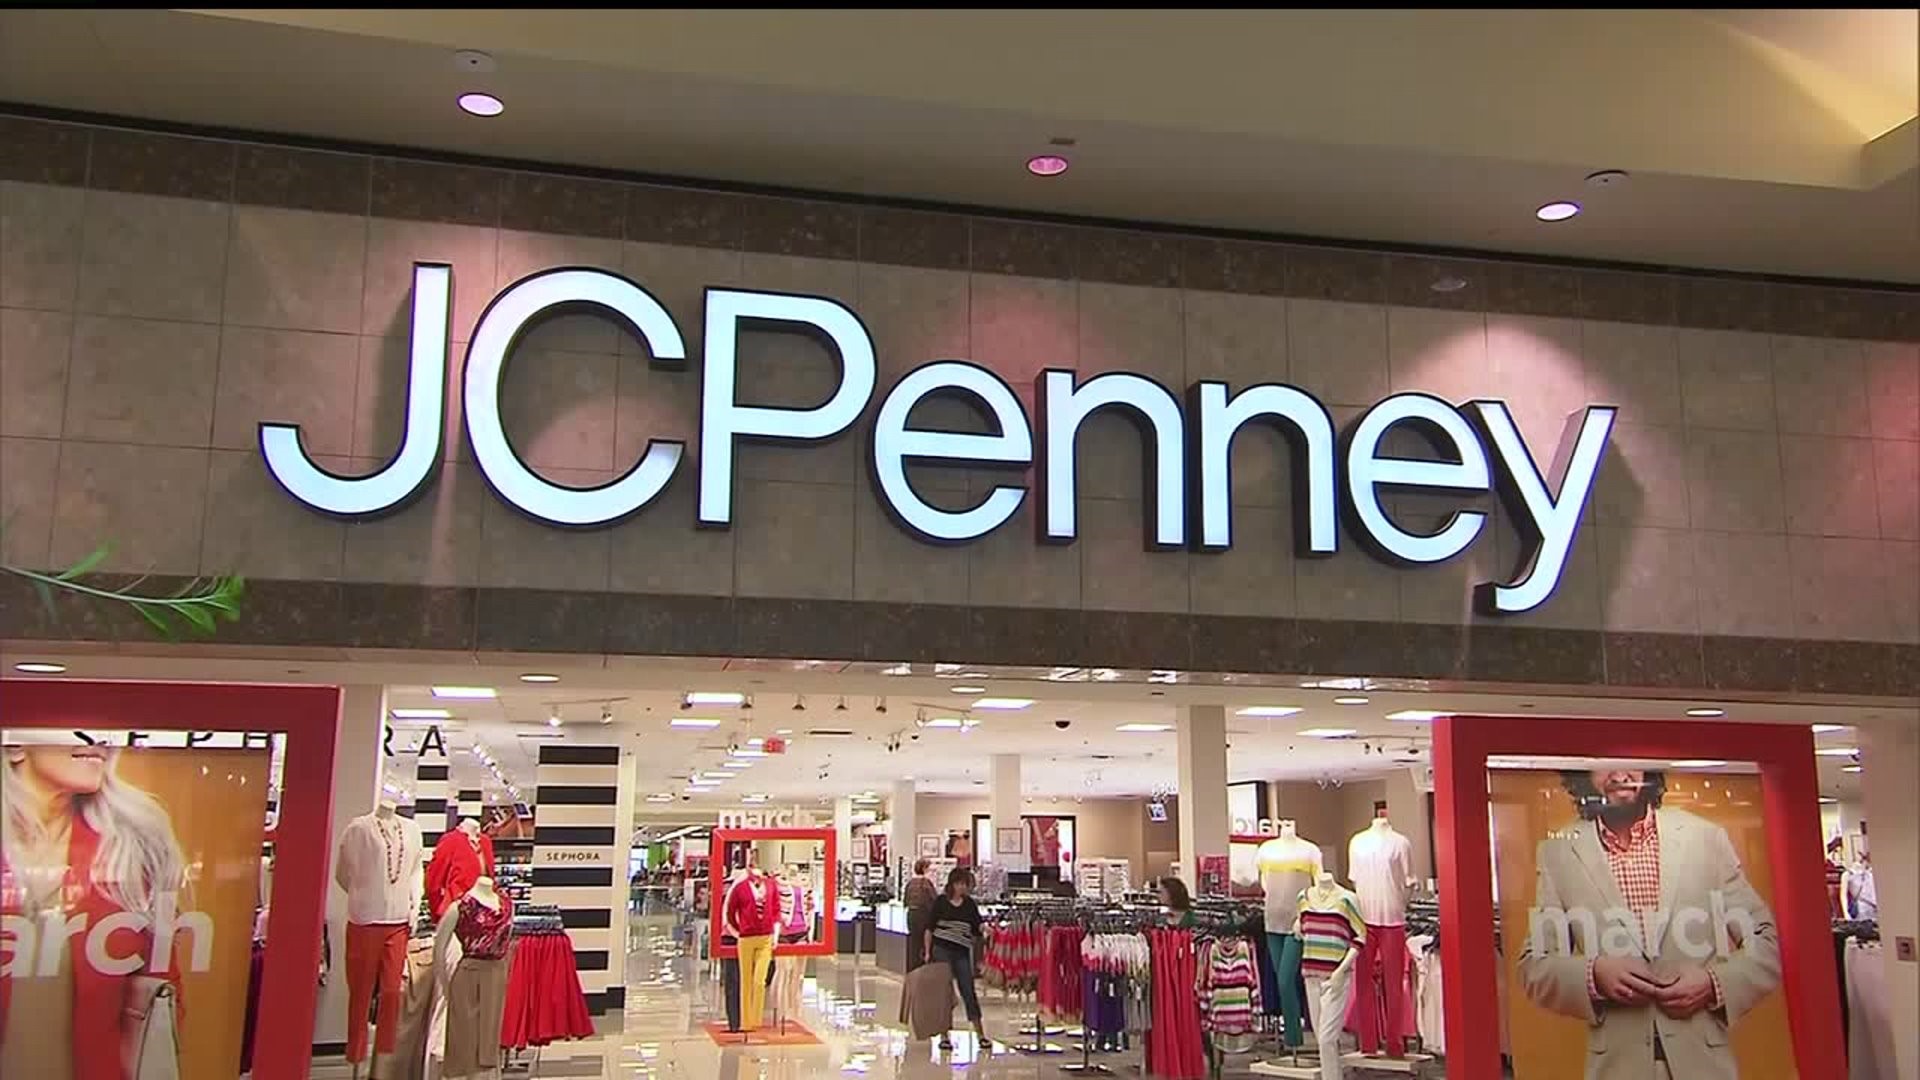 Jcpenney To Hire 100 Seasonal Workers In The Quad Cities Wqad Com